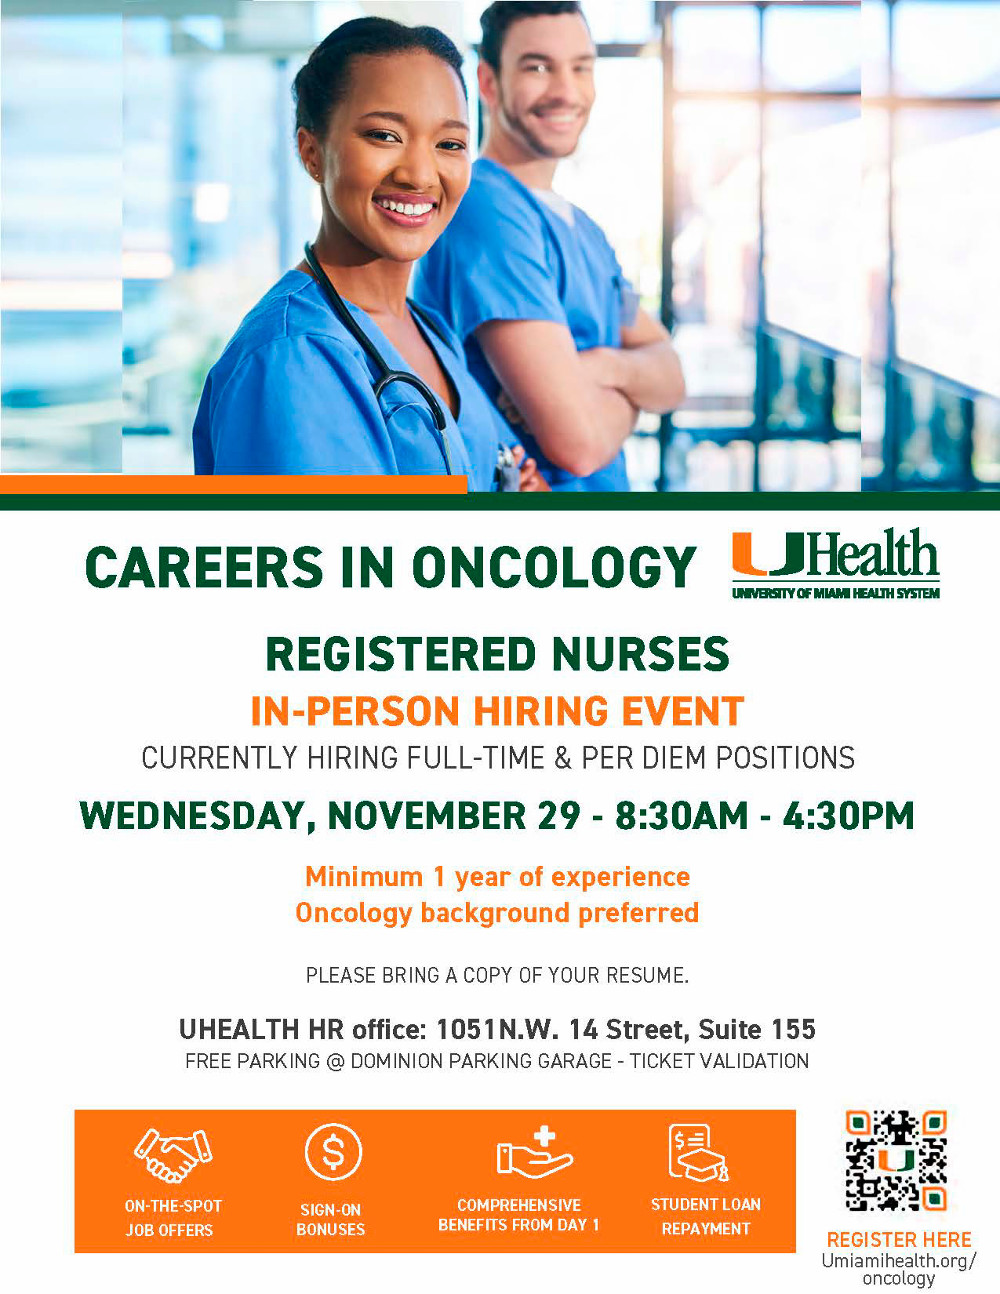 oNCOLOGY iN pERSON hIRING eVENT 11.29